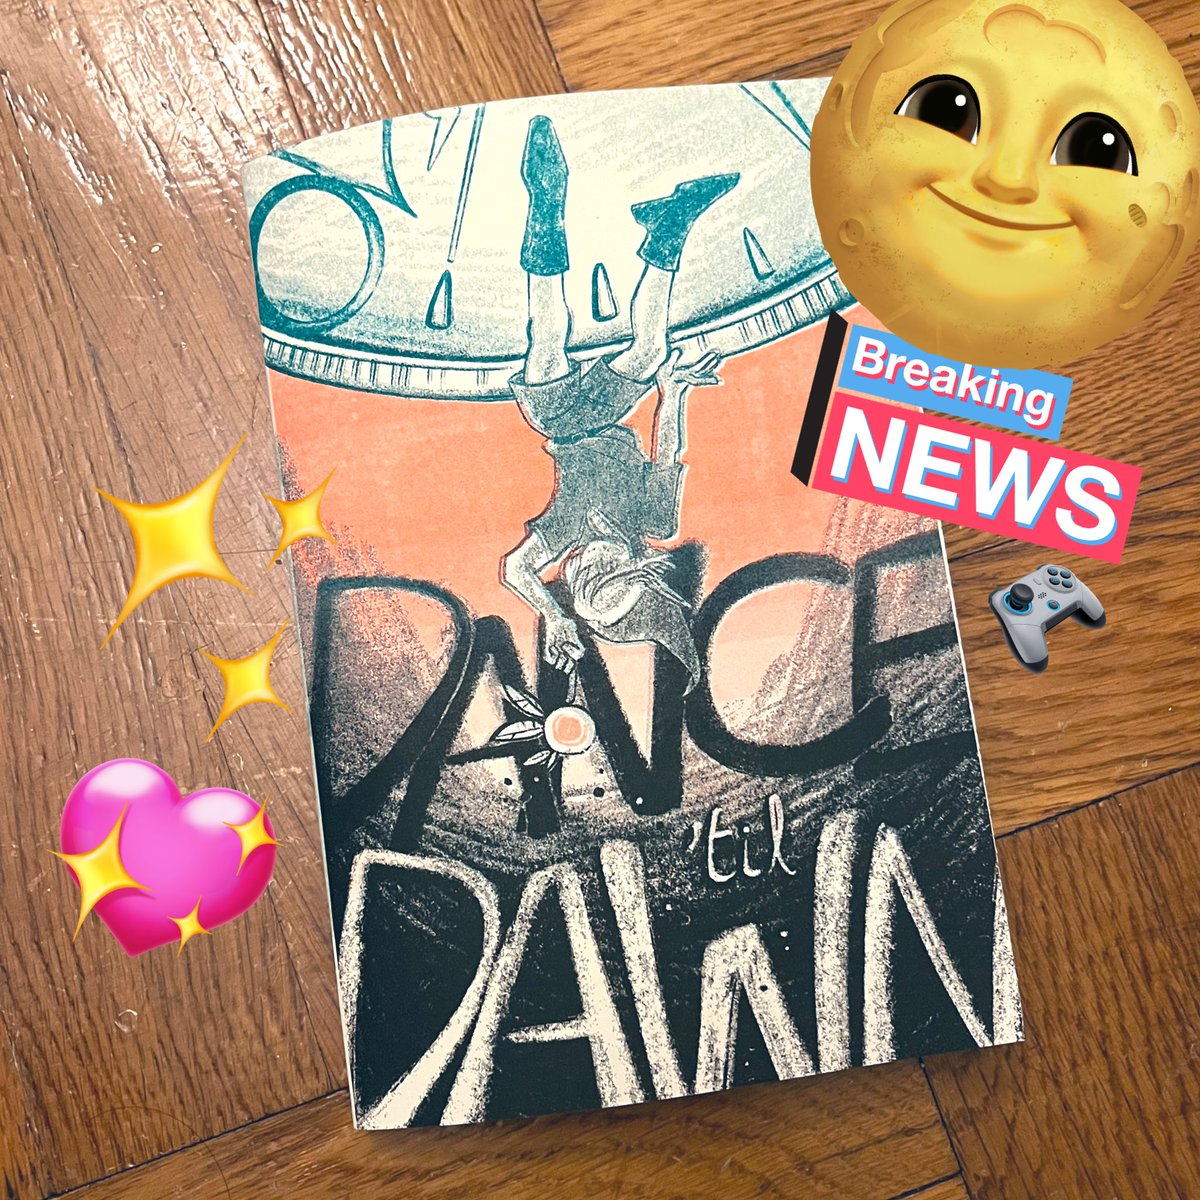 okay! last mocca post prob! see you this weekend, table 278, with some good oldies, SLIP and a new printing of DANCE TIL DAWN 🤘🏽🤘🏽🤘🏽😤💕
(thank u @yamfamcomics for the map graphic!!) 